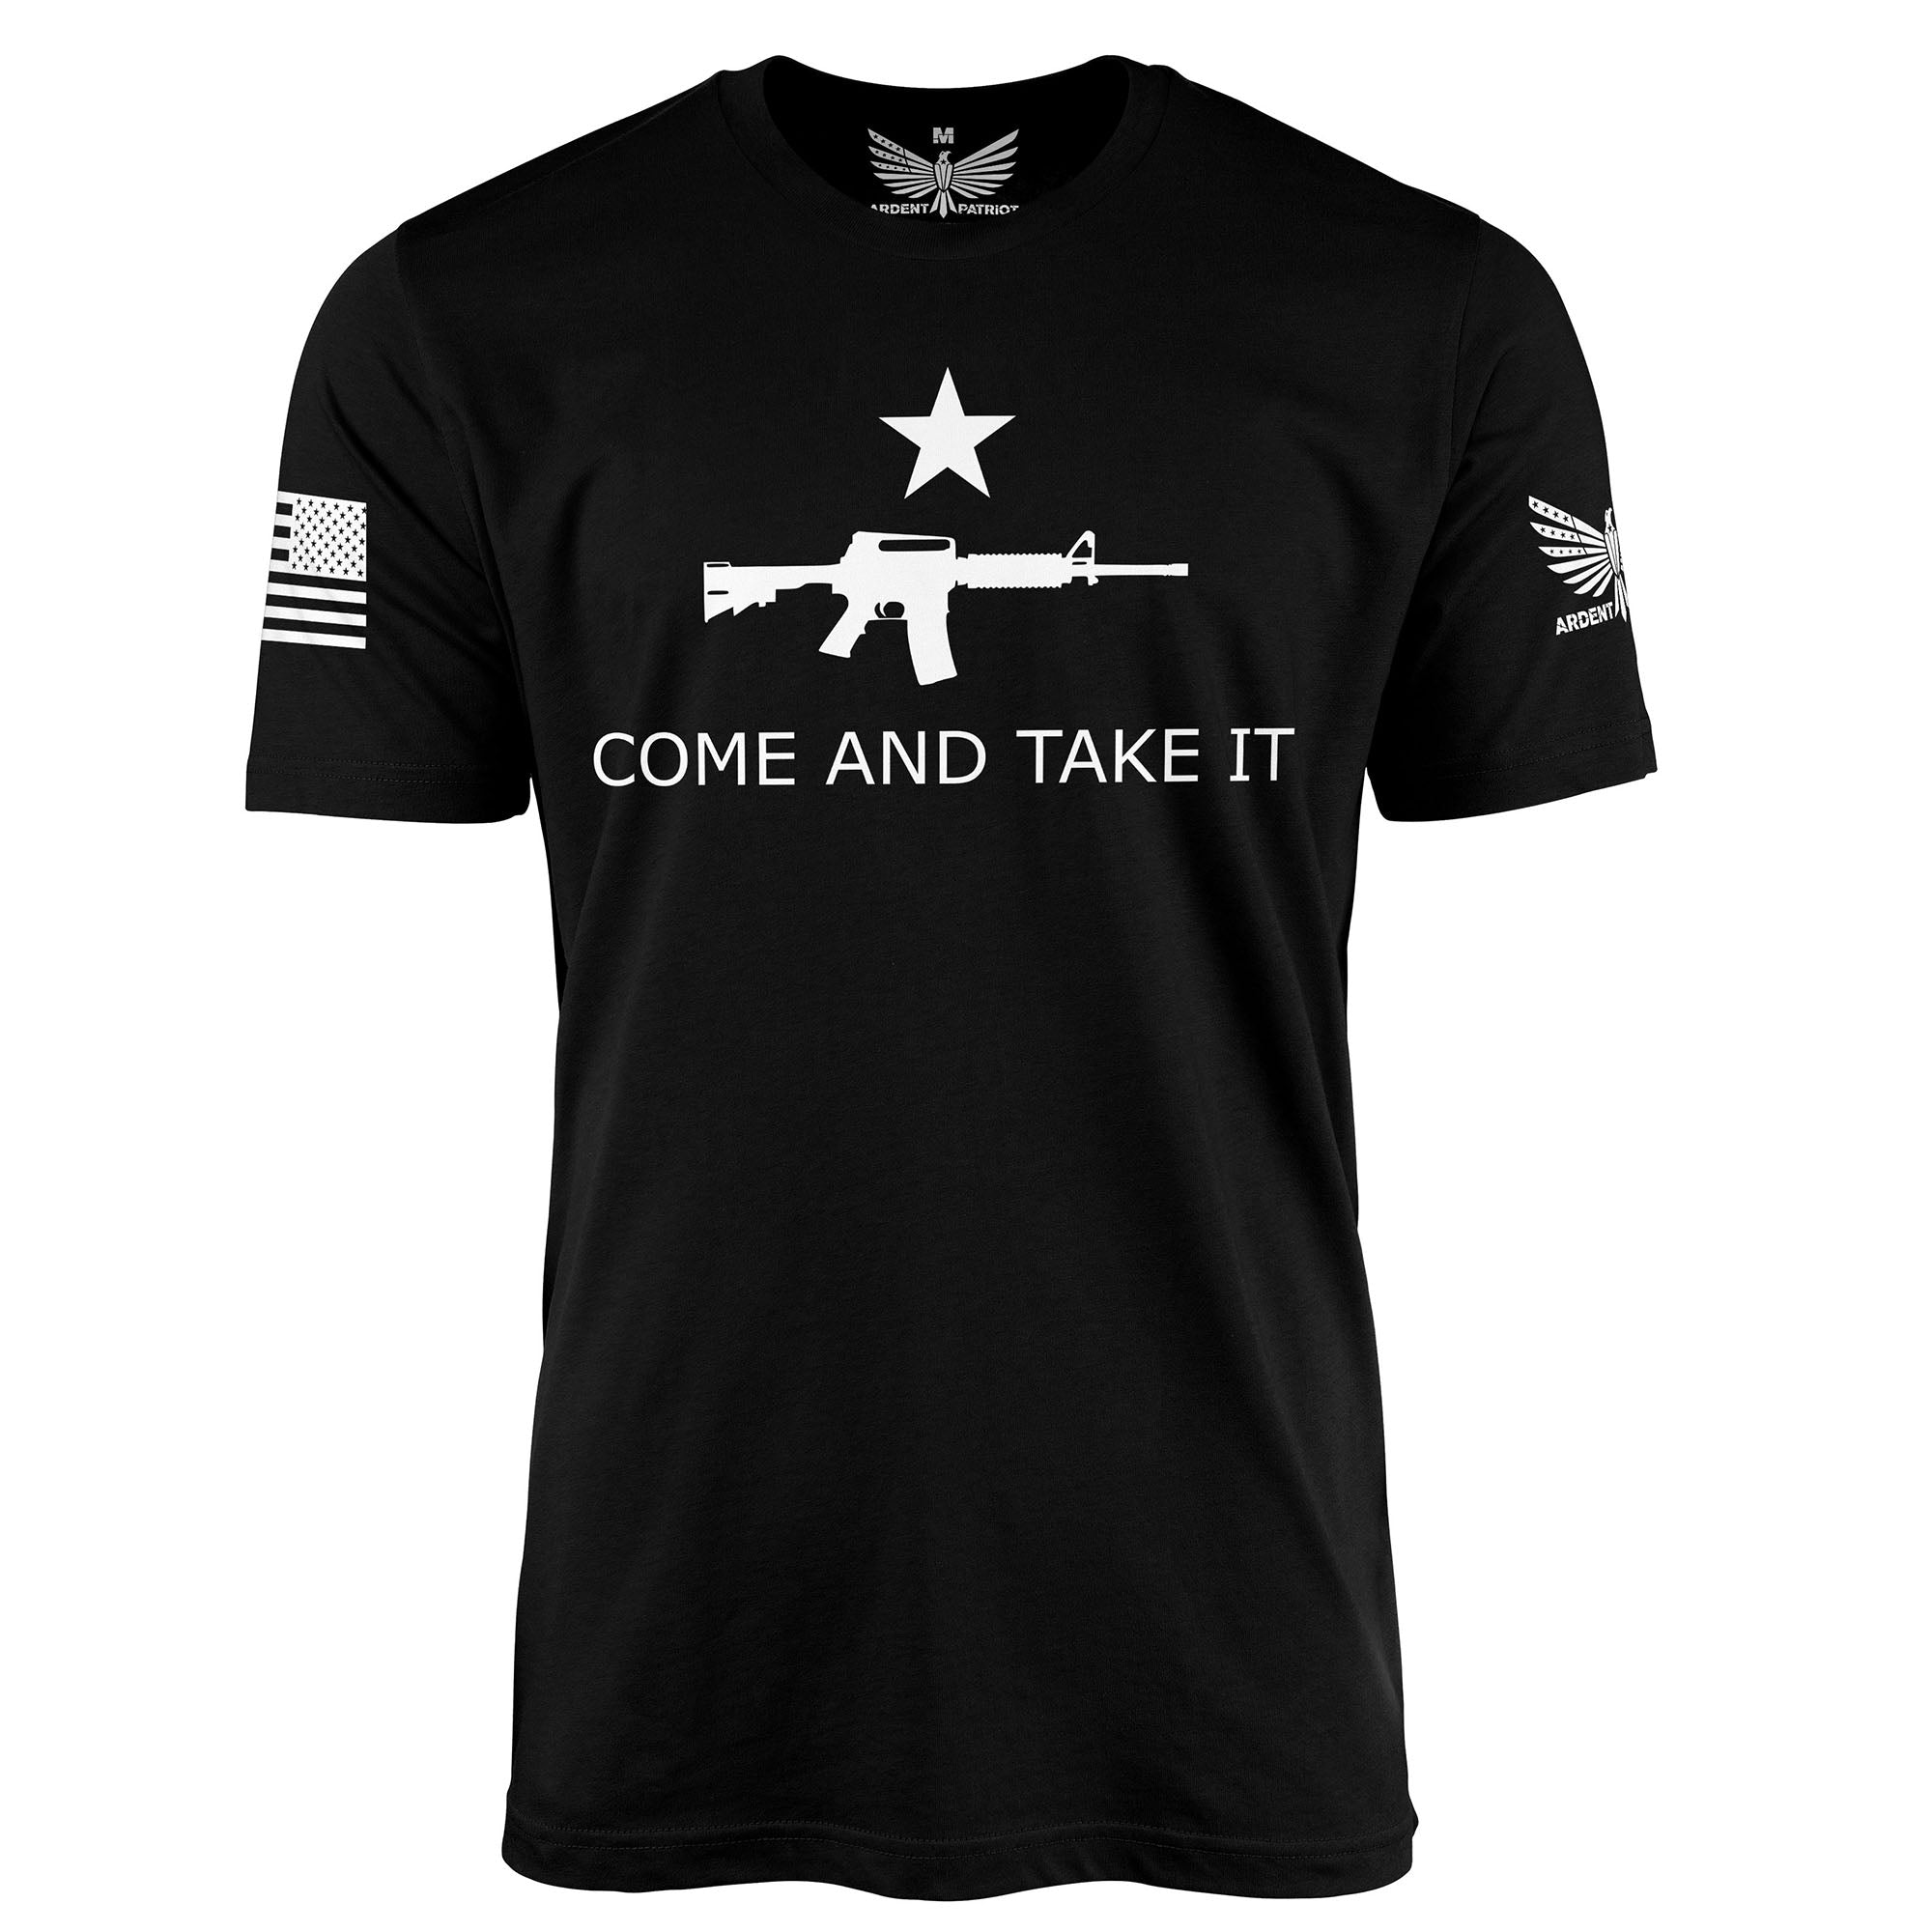 Come And Take It-Men's Shirt-S-Ardent Patriot Apparel Co.